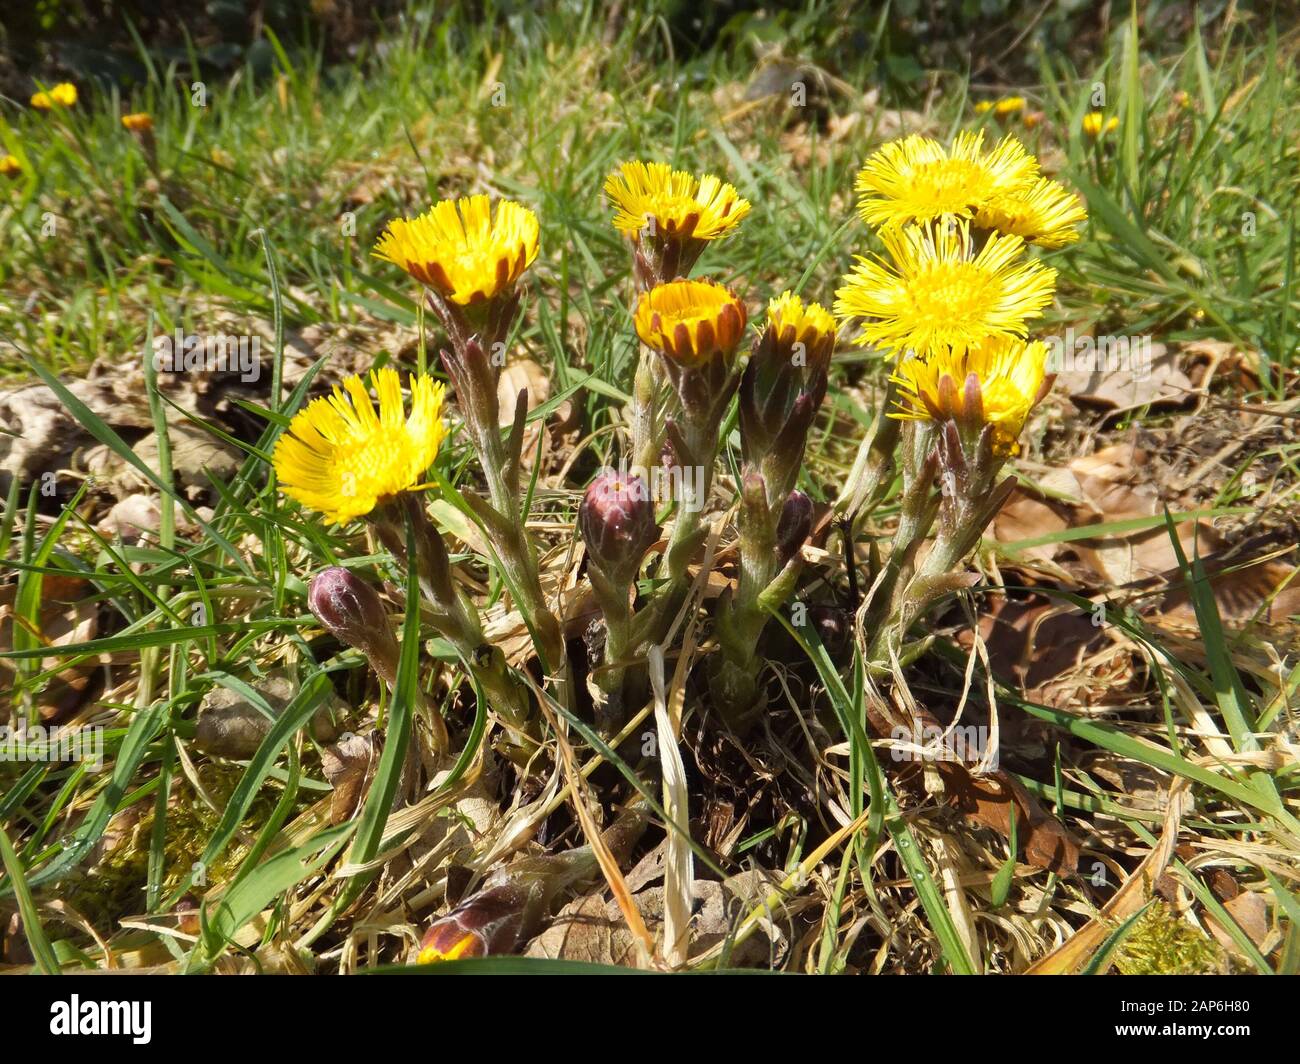 Colts Foot (Tussilago farfara) a member of the groundsel tribe in the daisy family Asteraceae, Stourhead. Wiltshire.UK Stock Photo